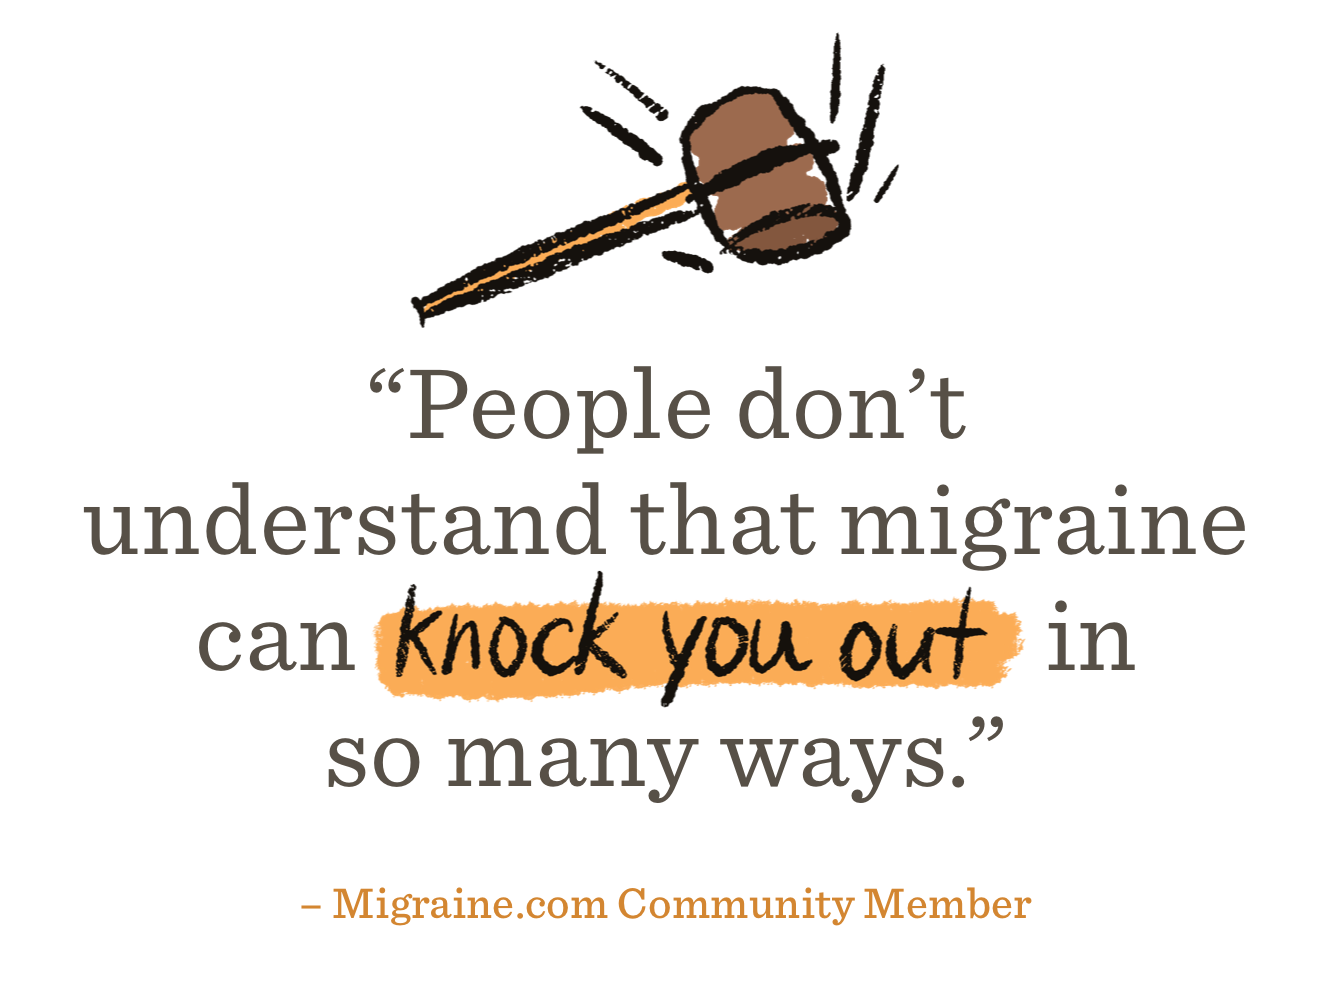 Gavel swings down over quote reading, People don’t understand that migraine can knock you out in so many ways from Migraine.com Community Member